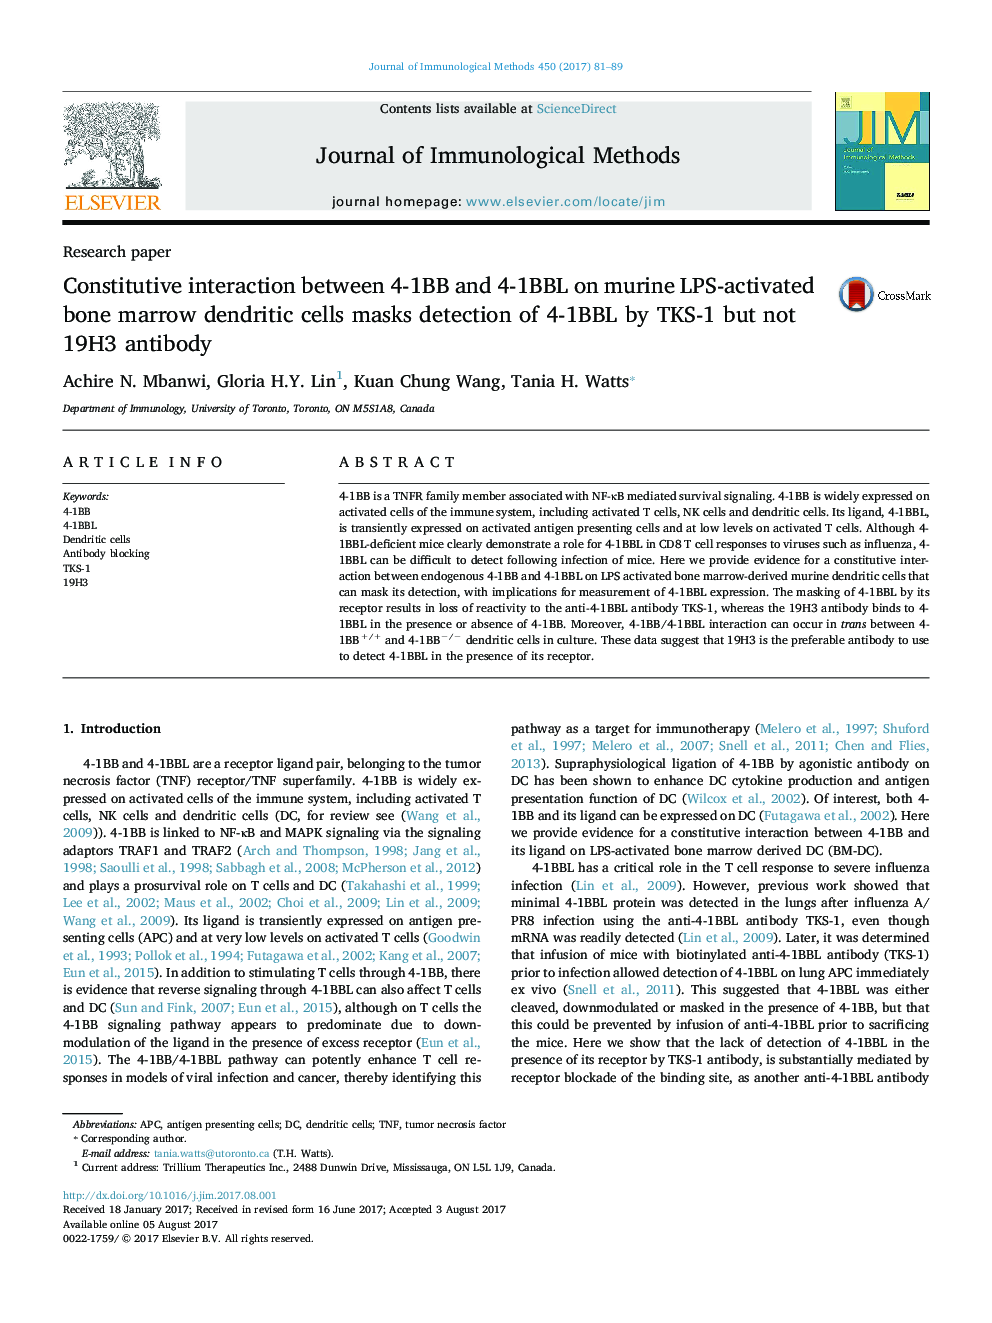 Research paperConstitutive interaction between 4-1BB and 4-1BBL on murine LPS-activated bone marrow dendritic cells masks detection of 4-1BBL by TKS-1 but not 19H3 antibody